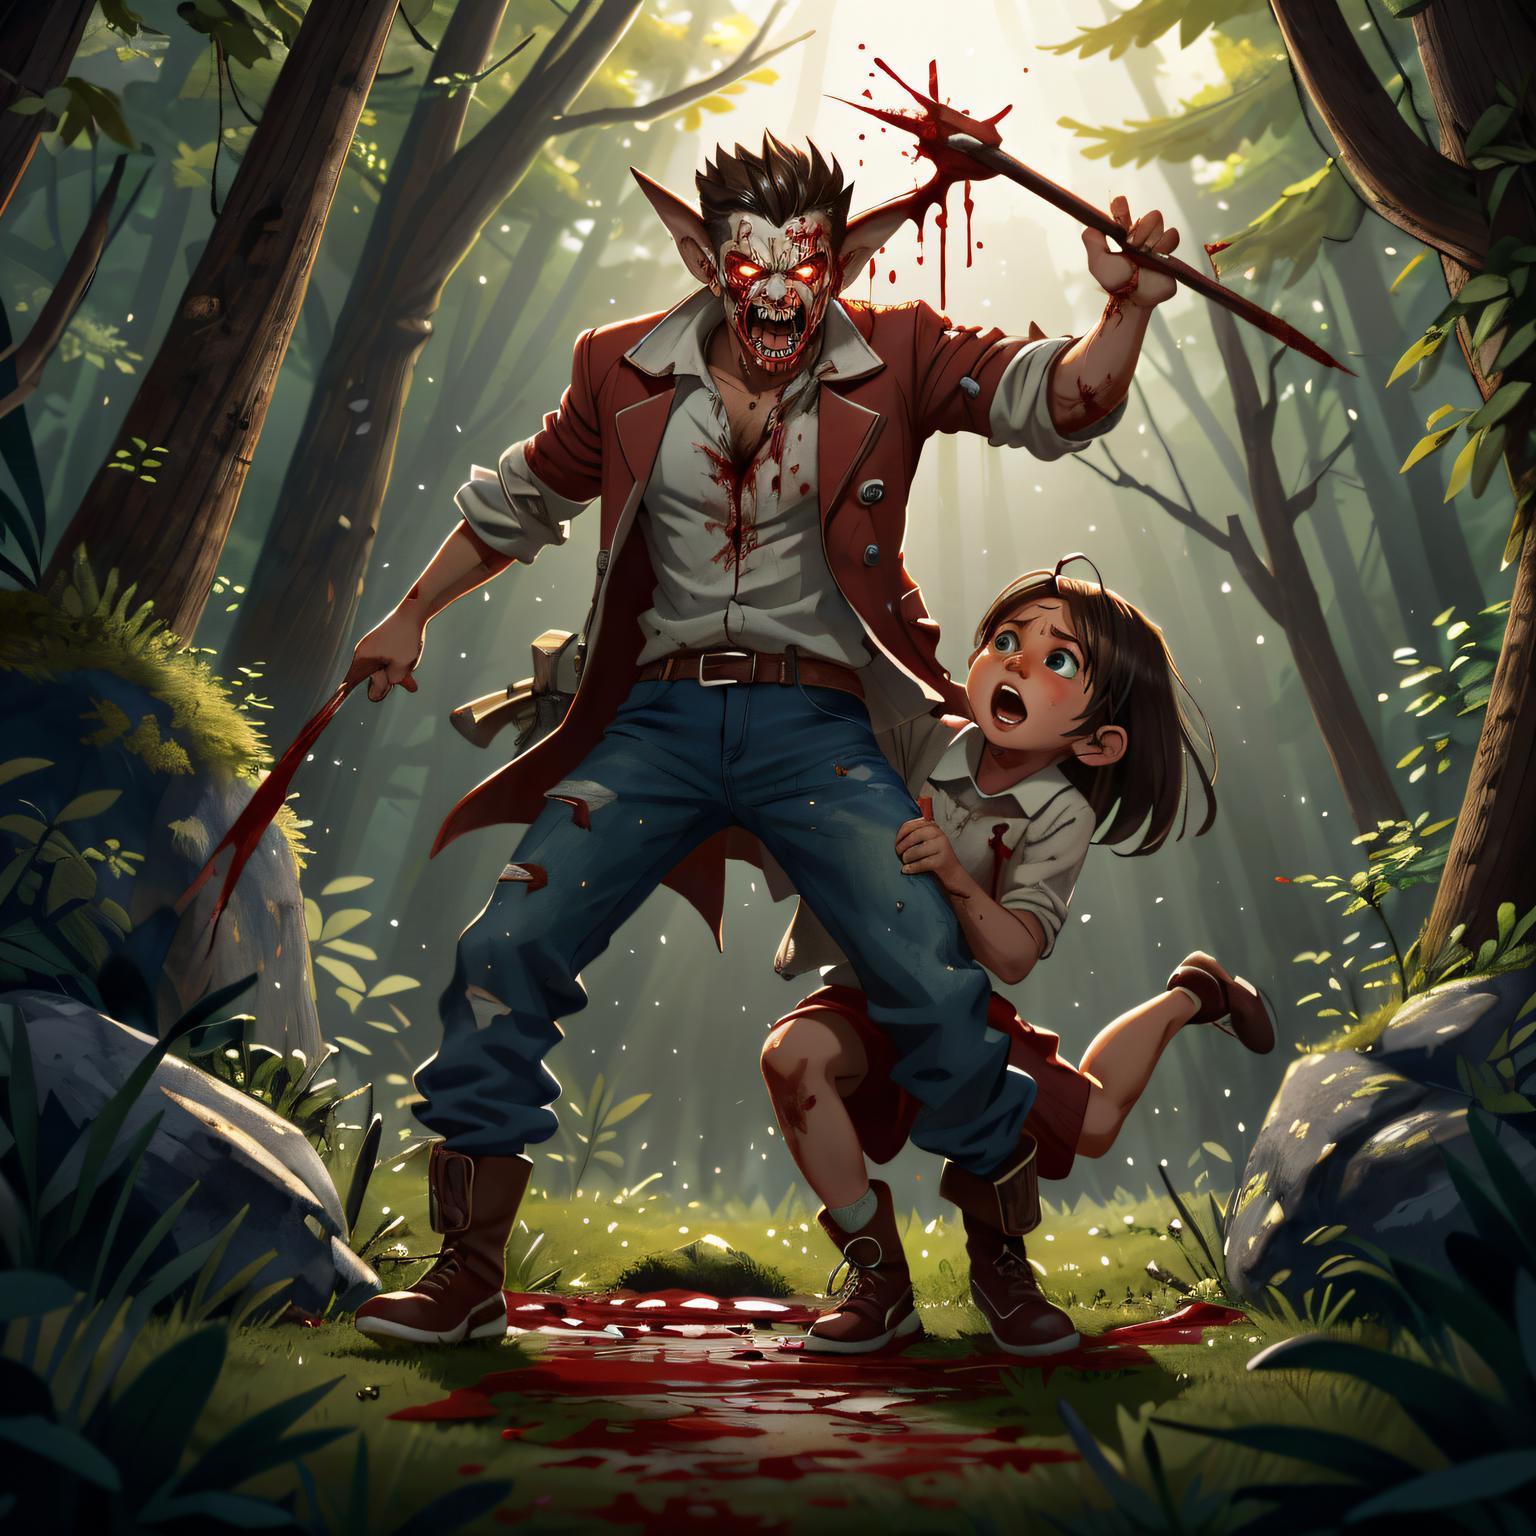 A man and a girl are in a forest. The man is holding a knife and there is blood on his face. The girl is looking up at him in fear.